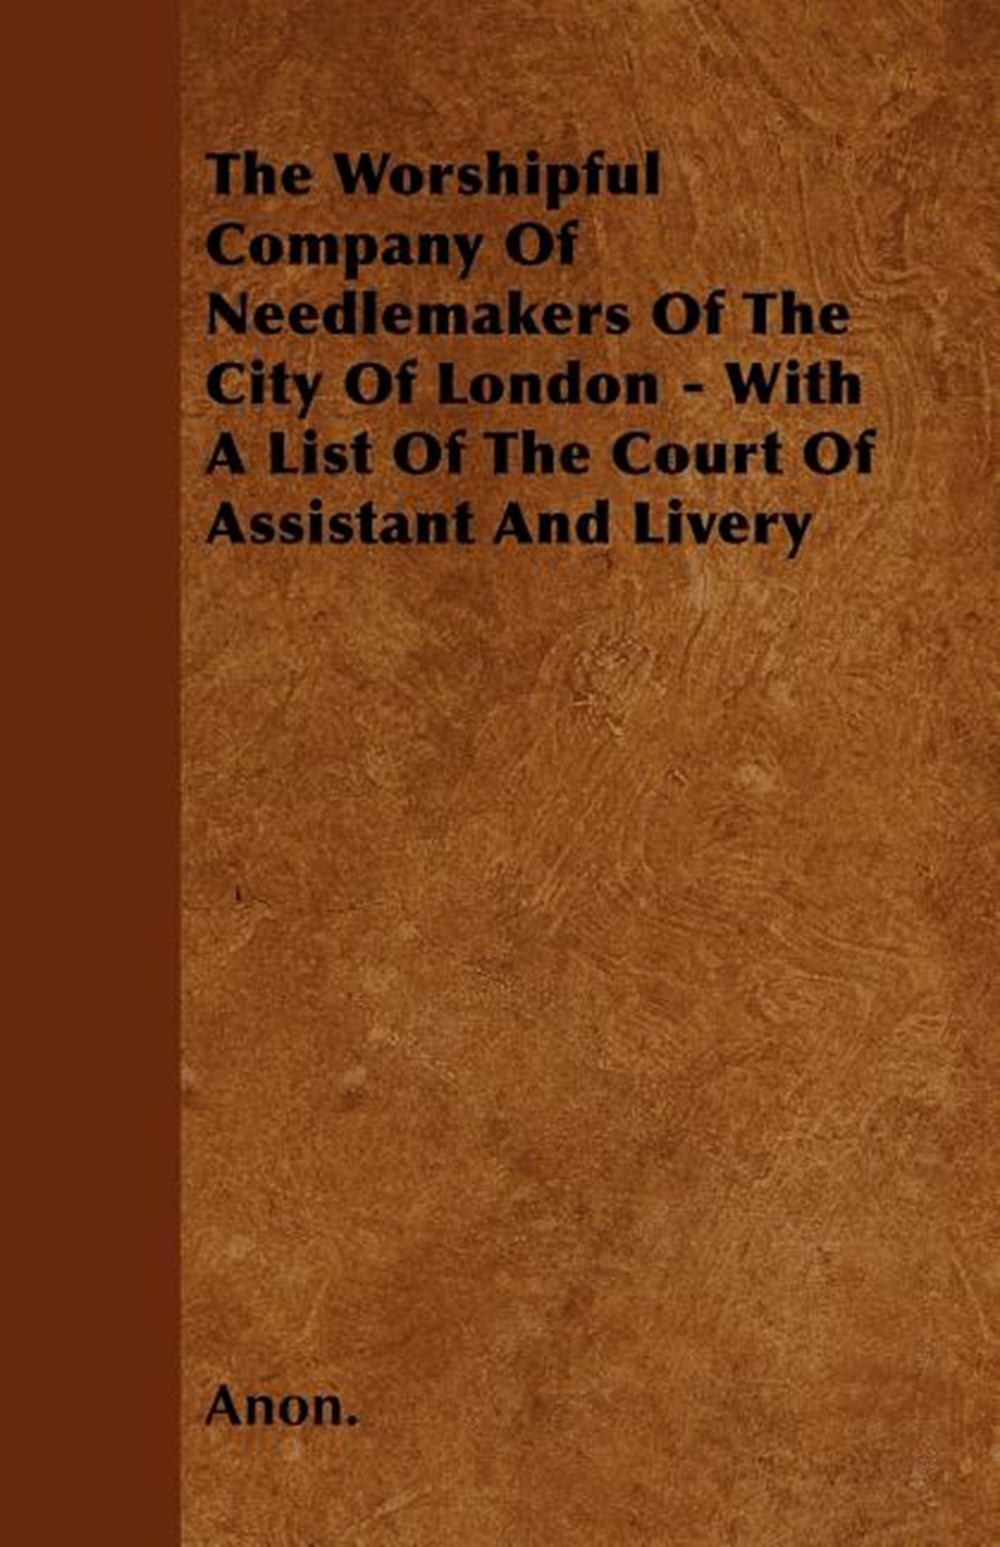 Worshipful Company of Needlemakers of the City of London - With a List of the Court of Assistant and